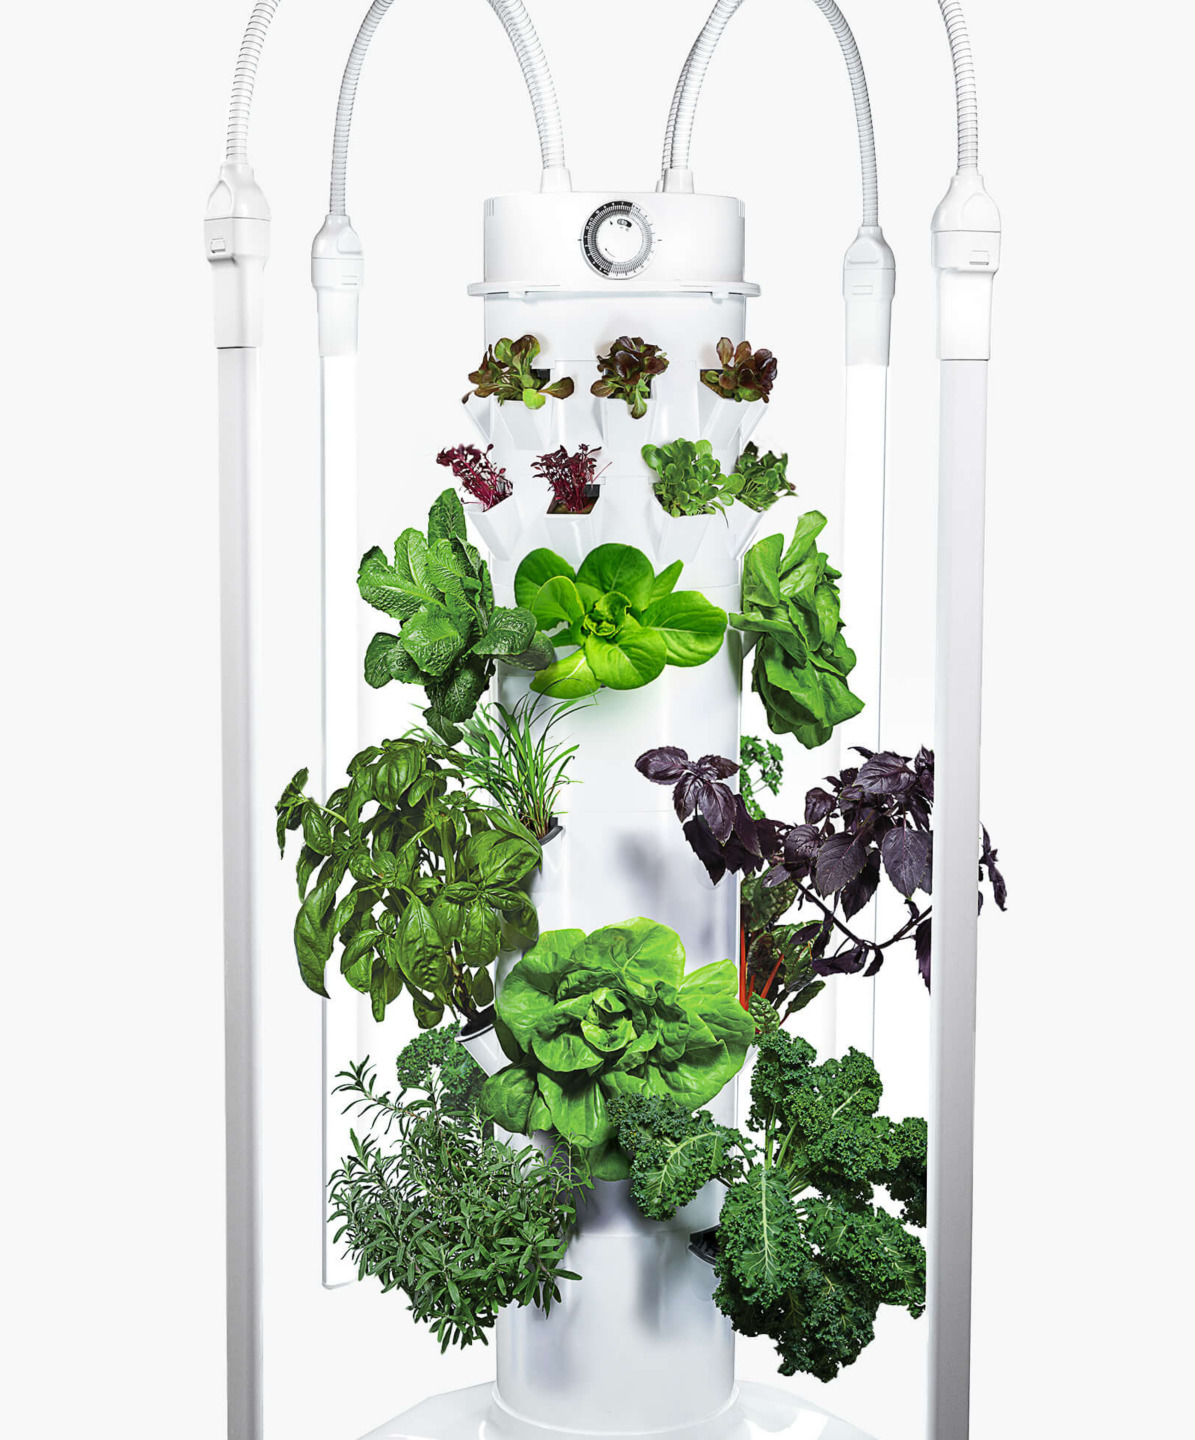 NEW Tower Garden Home Growing System